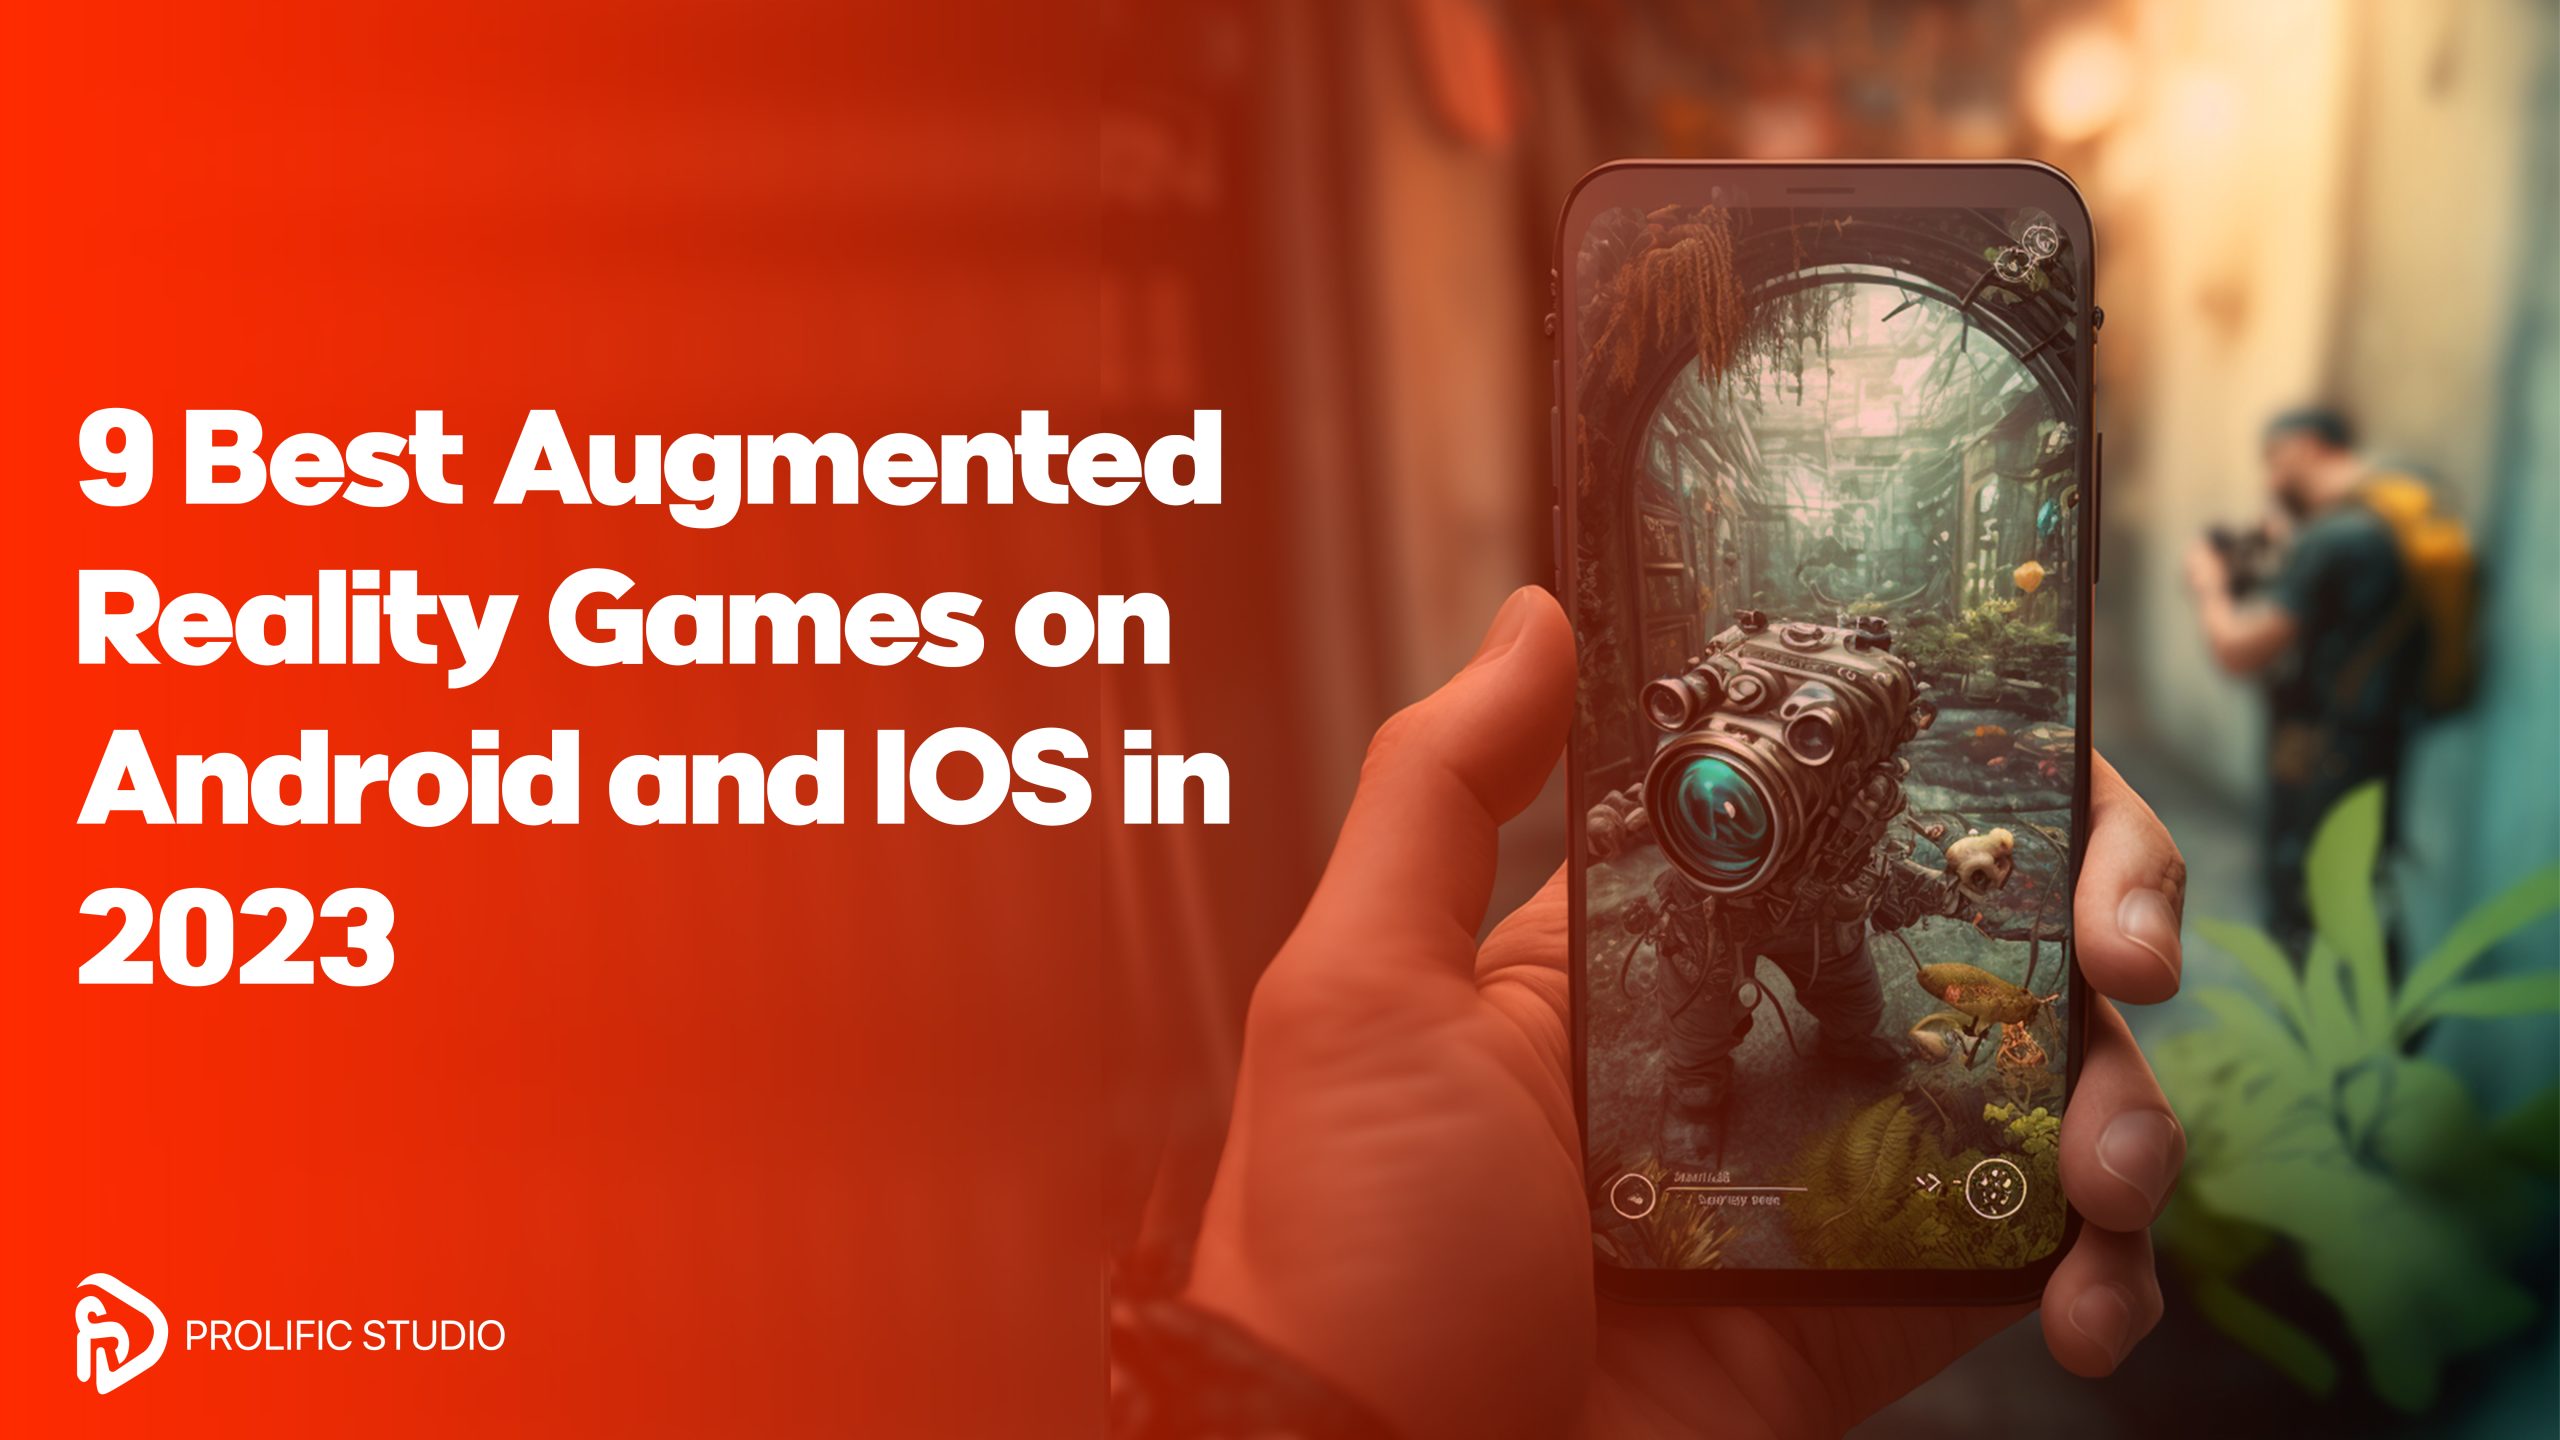 The Best Mobile Games For iOS And Android